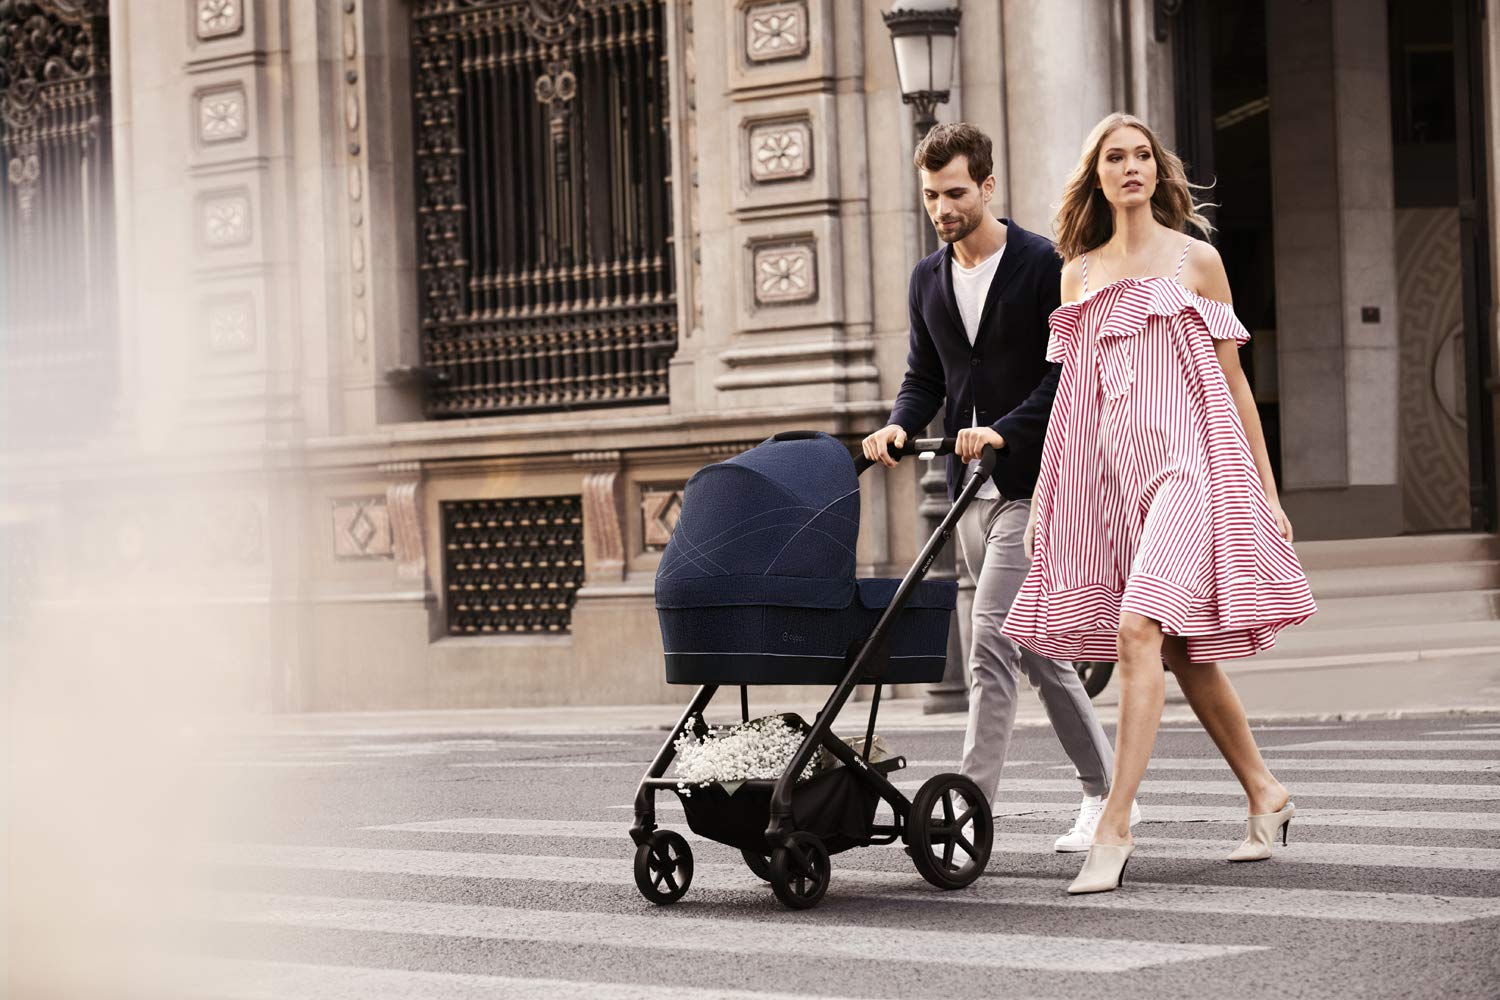 CYBEX Gold Convertible Pram Balios S with Pram Attachment Cot S, from birth up to 17 kg Denim Collection